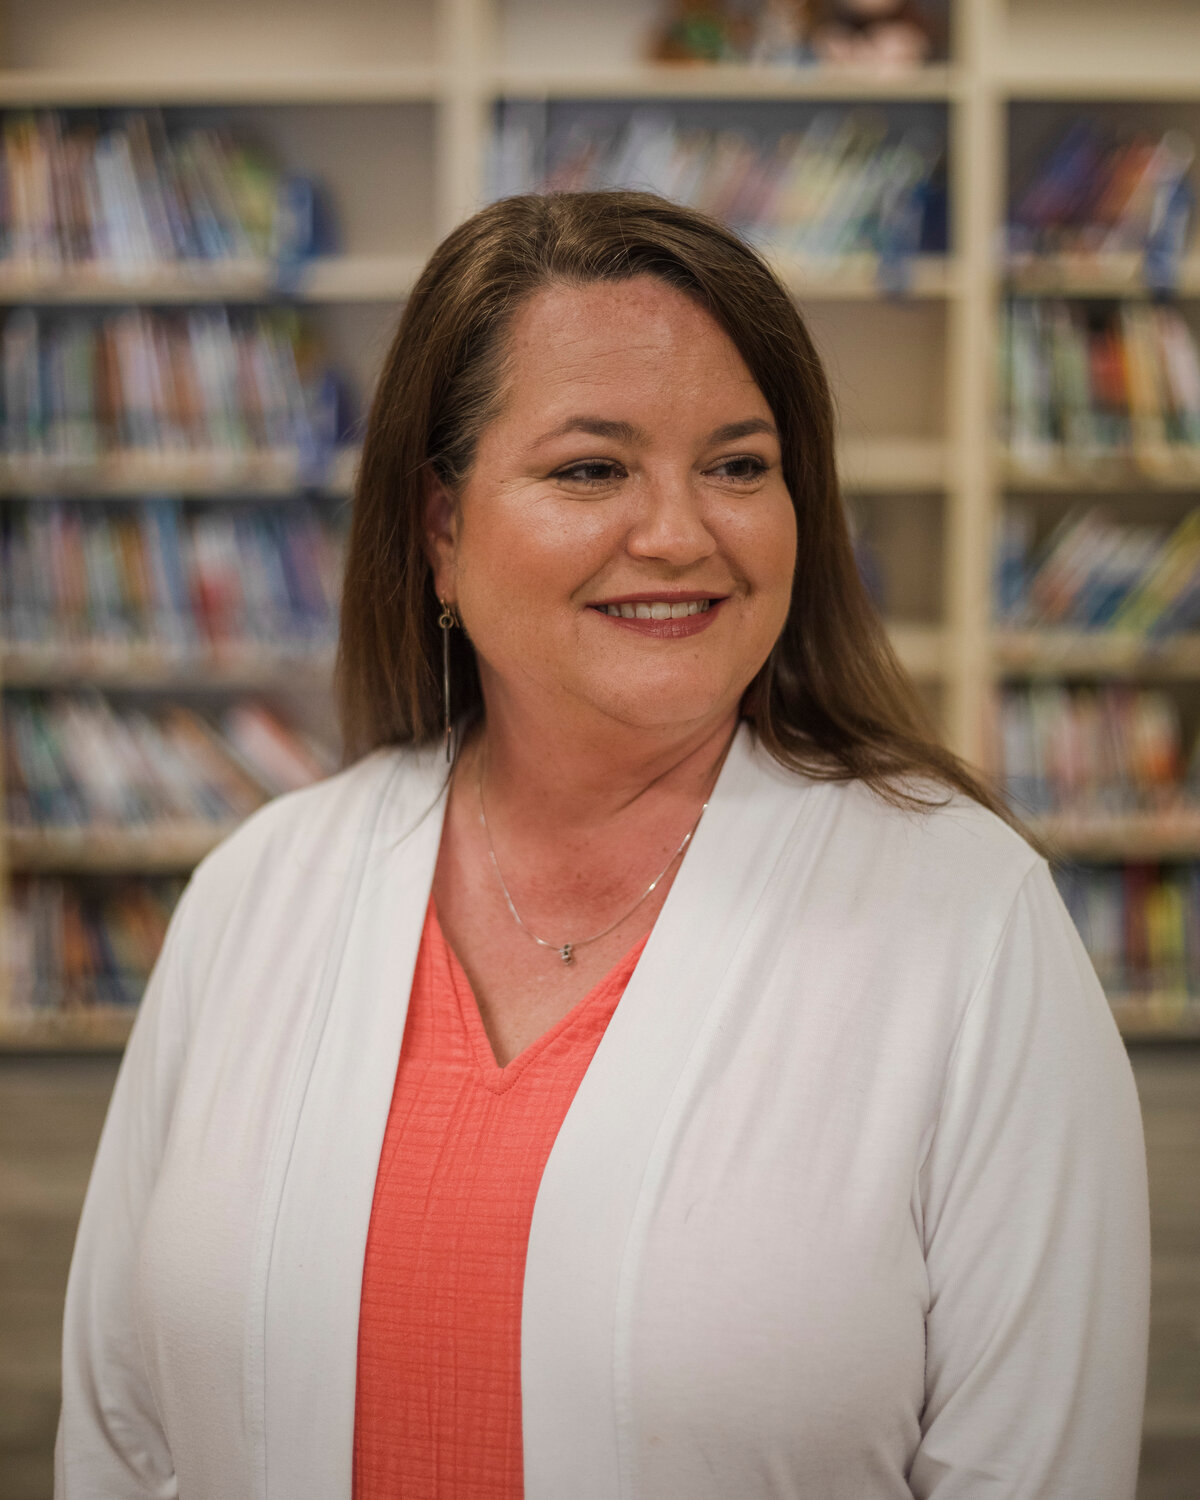 Amy Barker, a Foley Elementary School teacher, has been named Teacher of the Year by the Baldwin County School System.